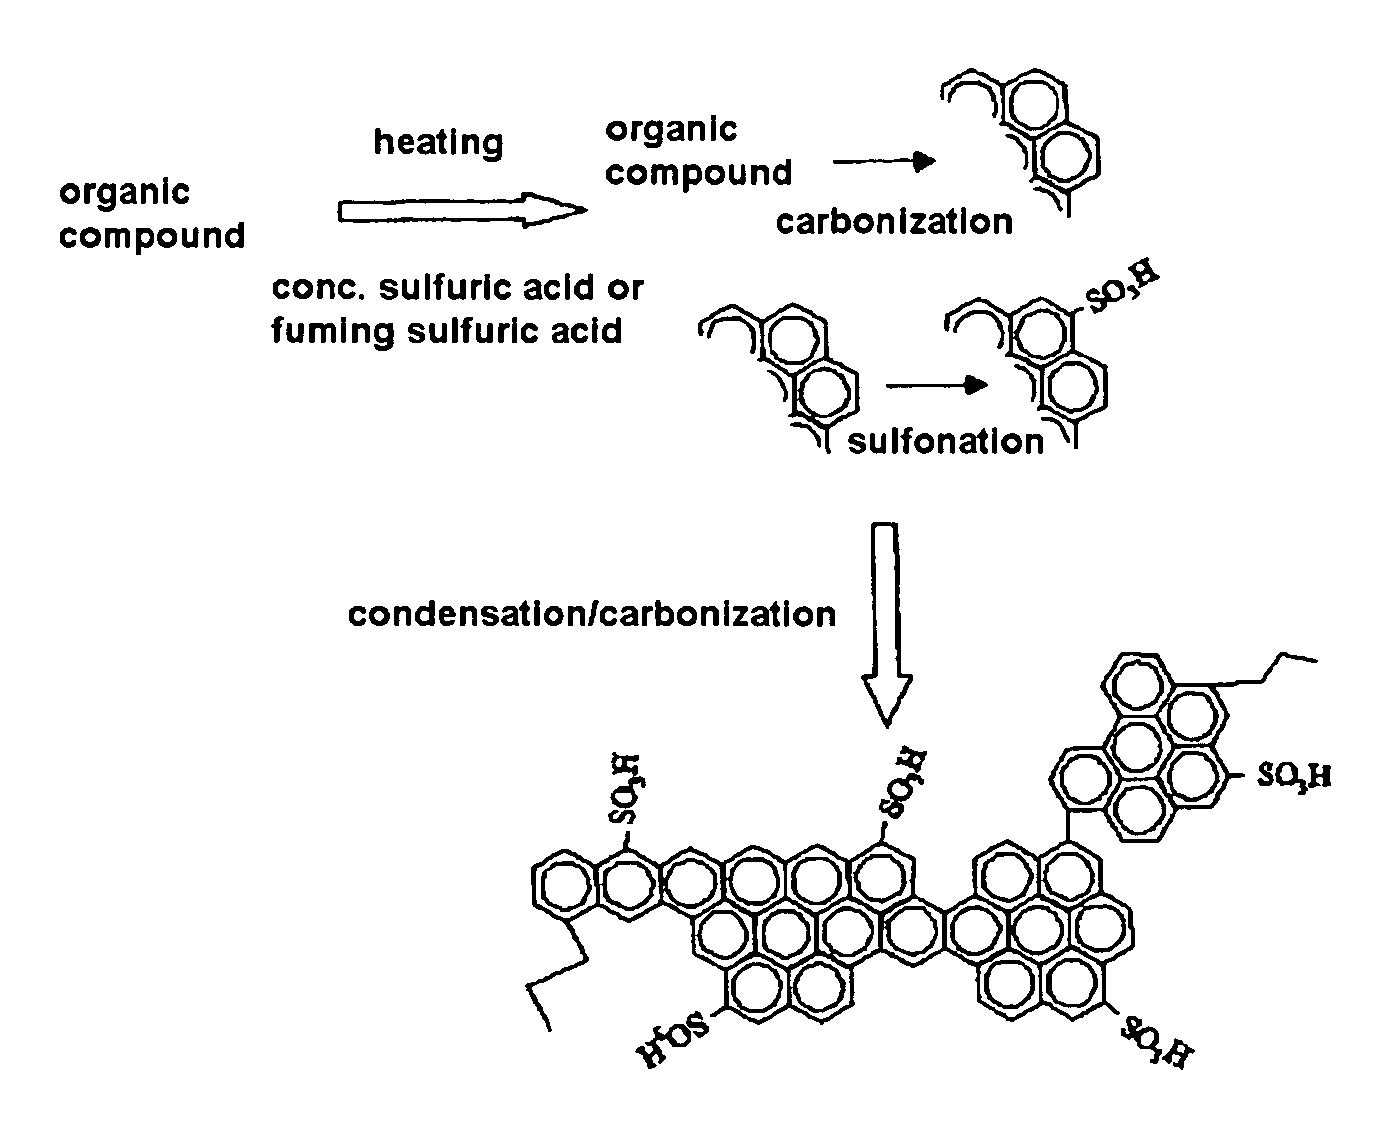 Sulfonated Amorphous Carbon, Process for Producing the Same and Use Thereof